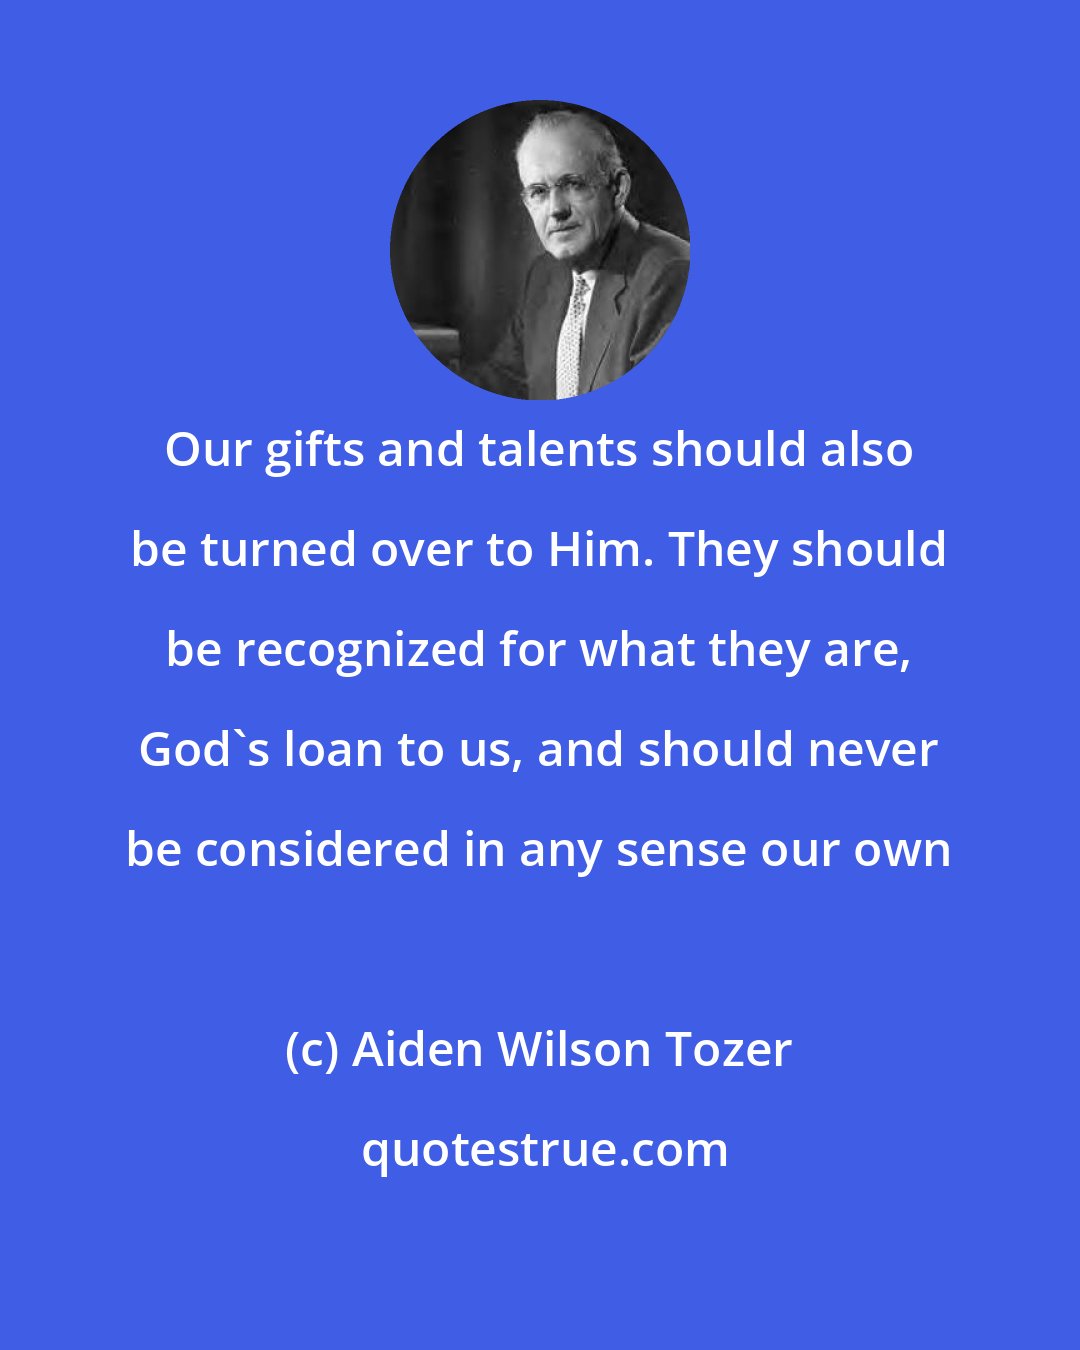 Aiden Wilson Tozer: Our gifts and talents should also be turned over to Him. They should be recognized for what they are, God's loan to us, and should never be considered in any sense our own